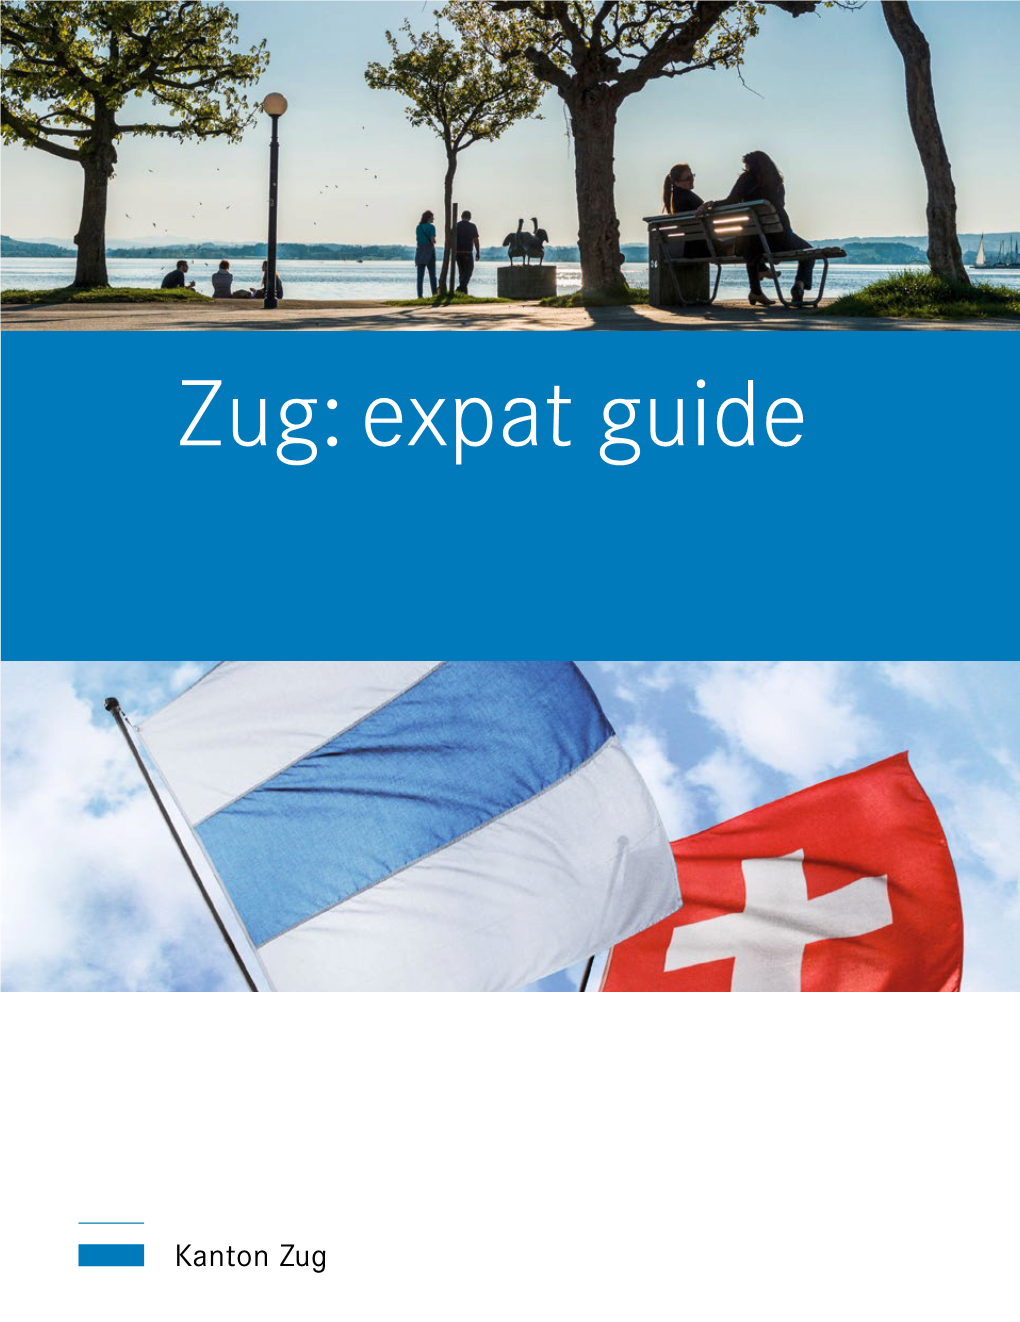 Zug Expat Guide 2019